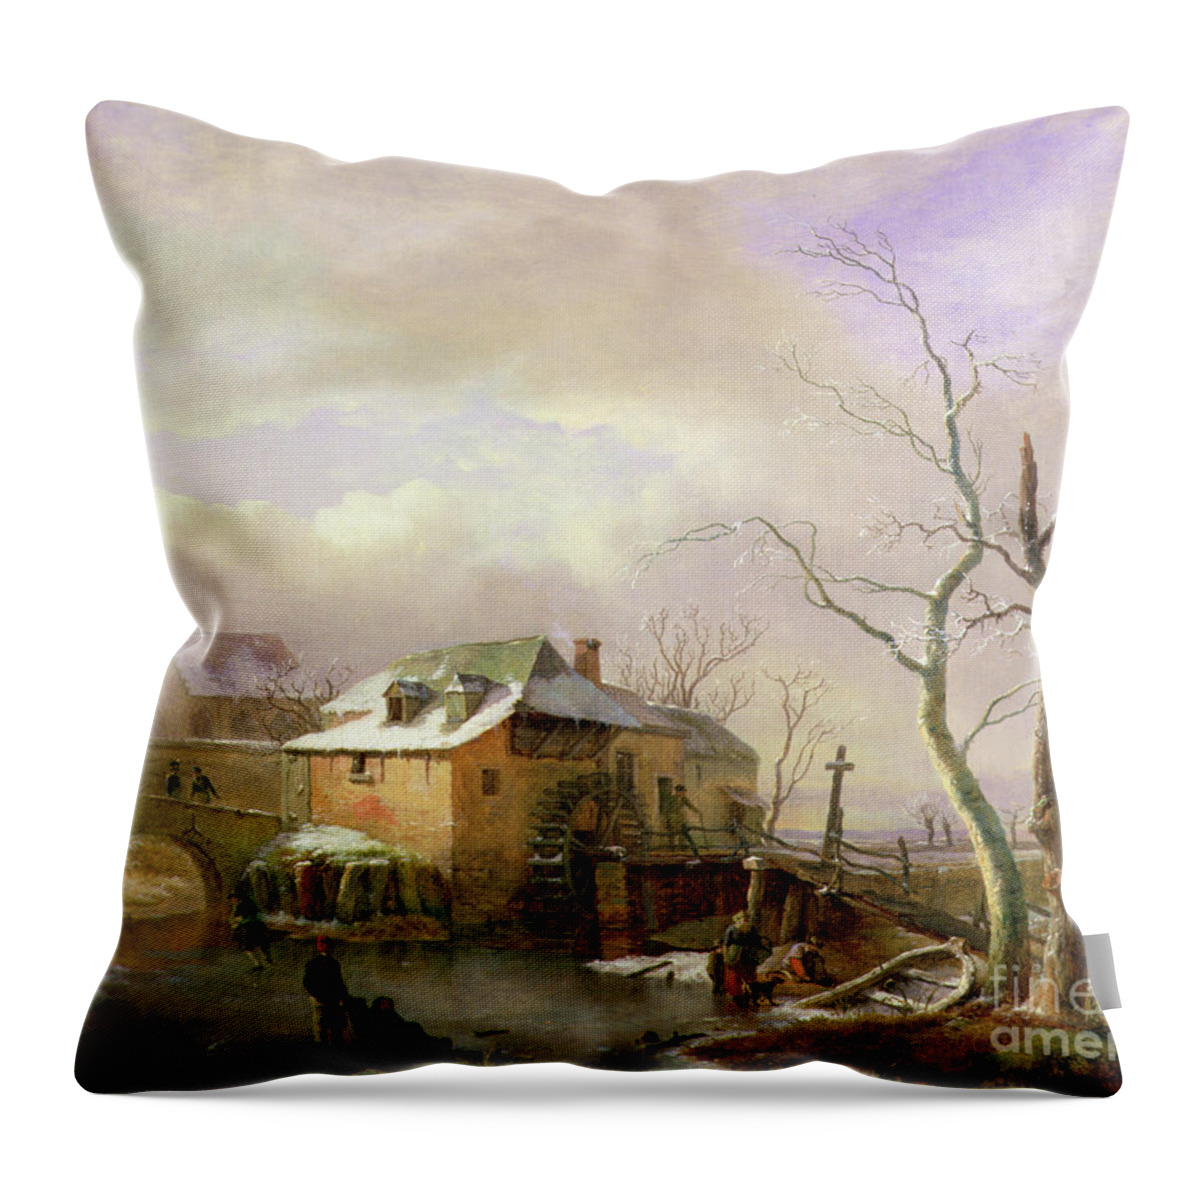 Skating Throw Pillow featuring the painting A Winter Landscape With Peasants On A Frozen Millpond By A Village by Ignatius Josephus Van Regemorter